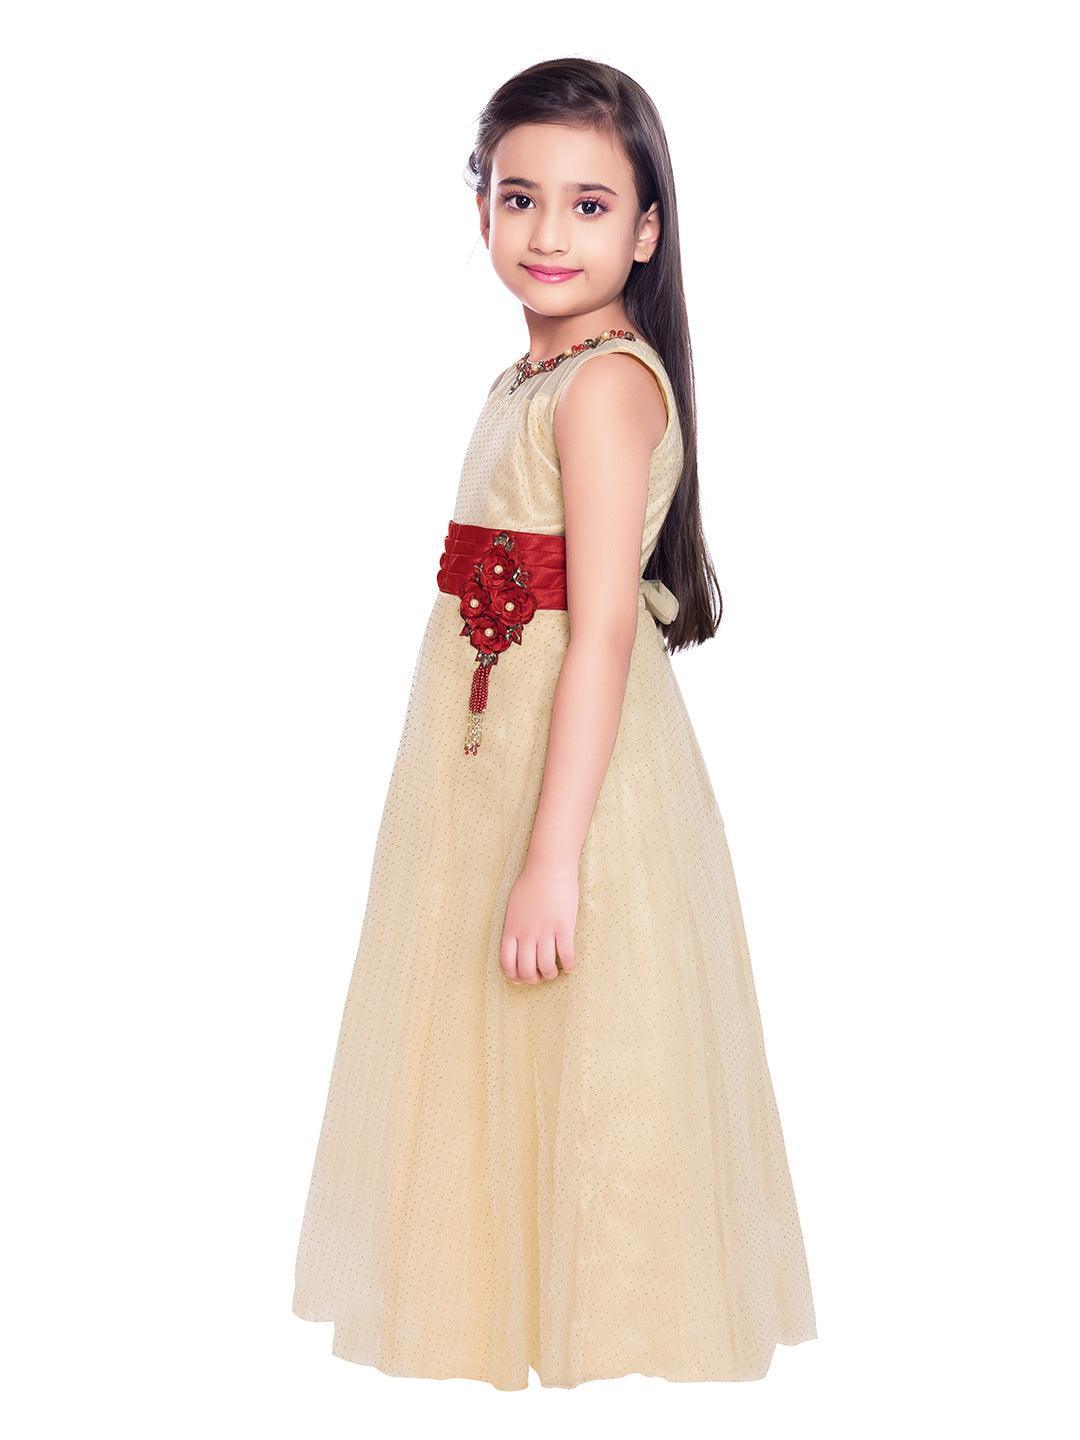 Kids Gown Ideas 15 Stylish Gown Designs for Kids